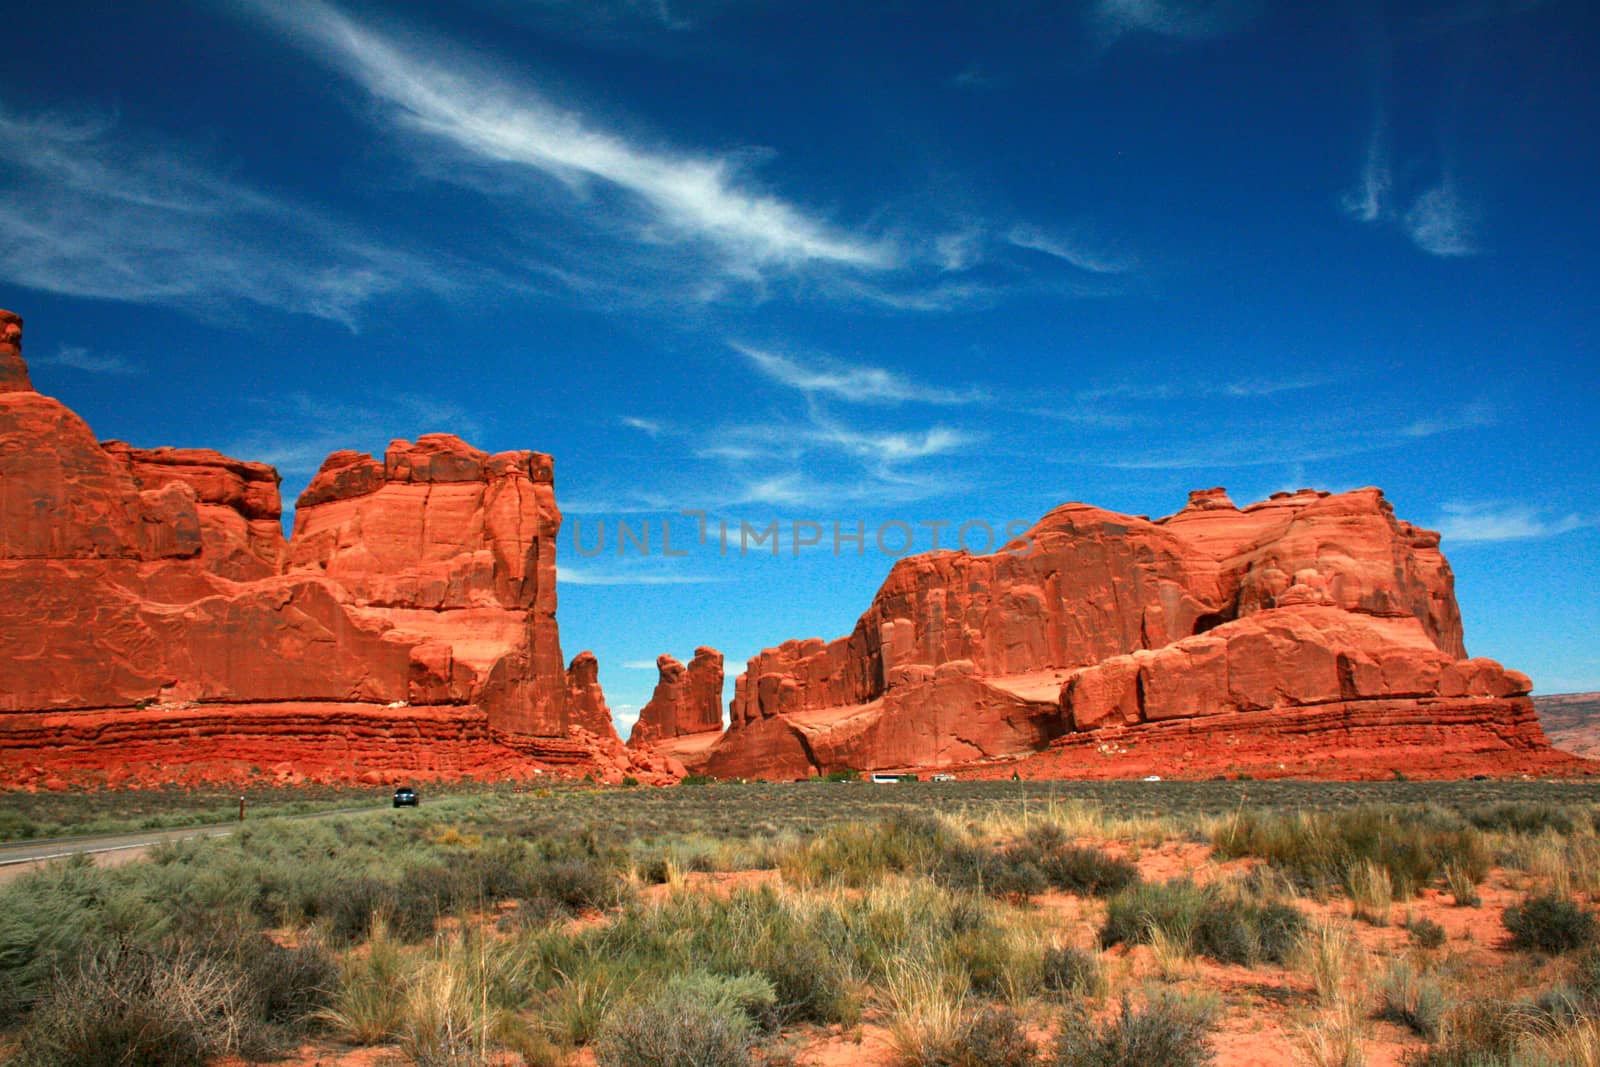 Park Avenue red rock formations sculpted from Entrada Strata in the Arches National Park.